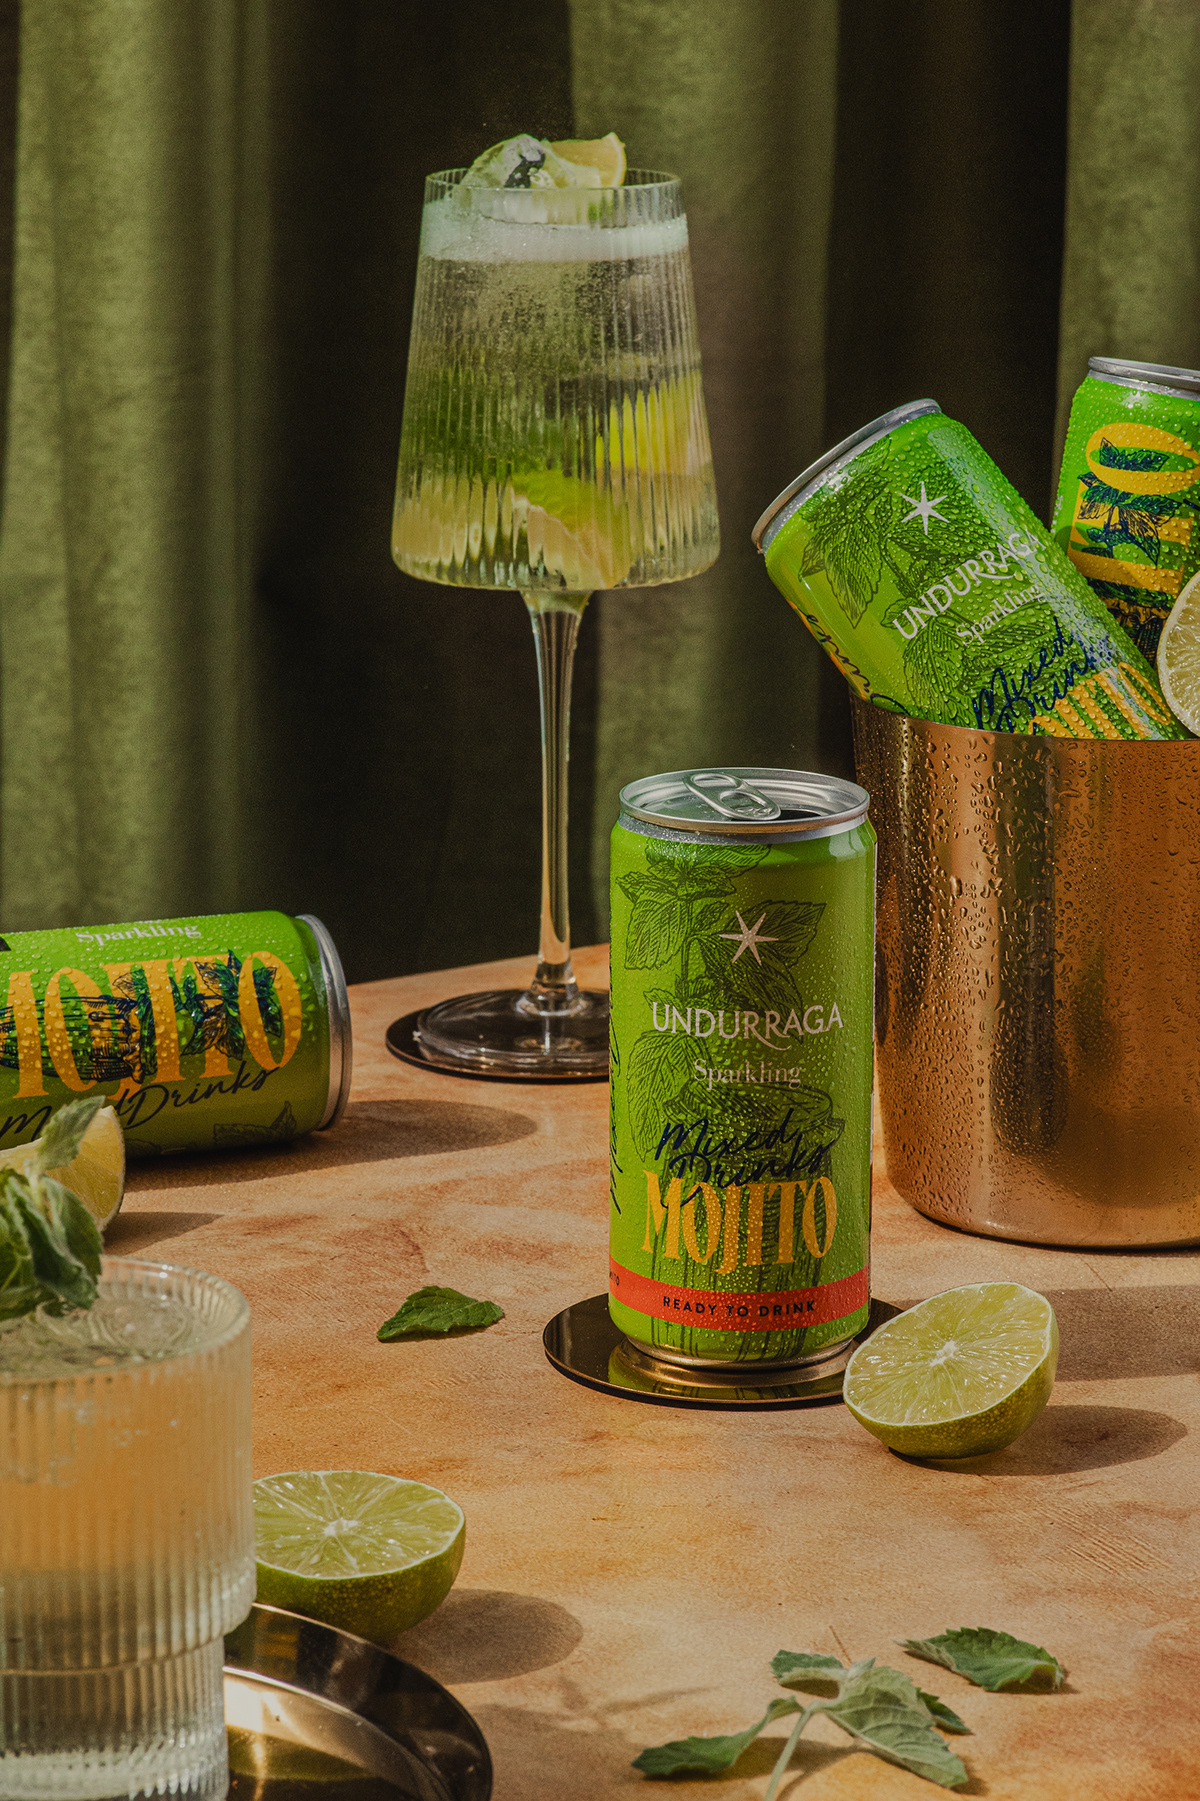 mojito Tropical sparkling wine trago lata canned can alcohol Food 